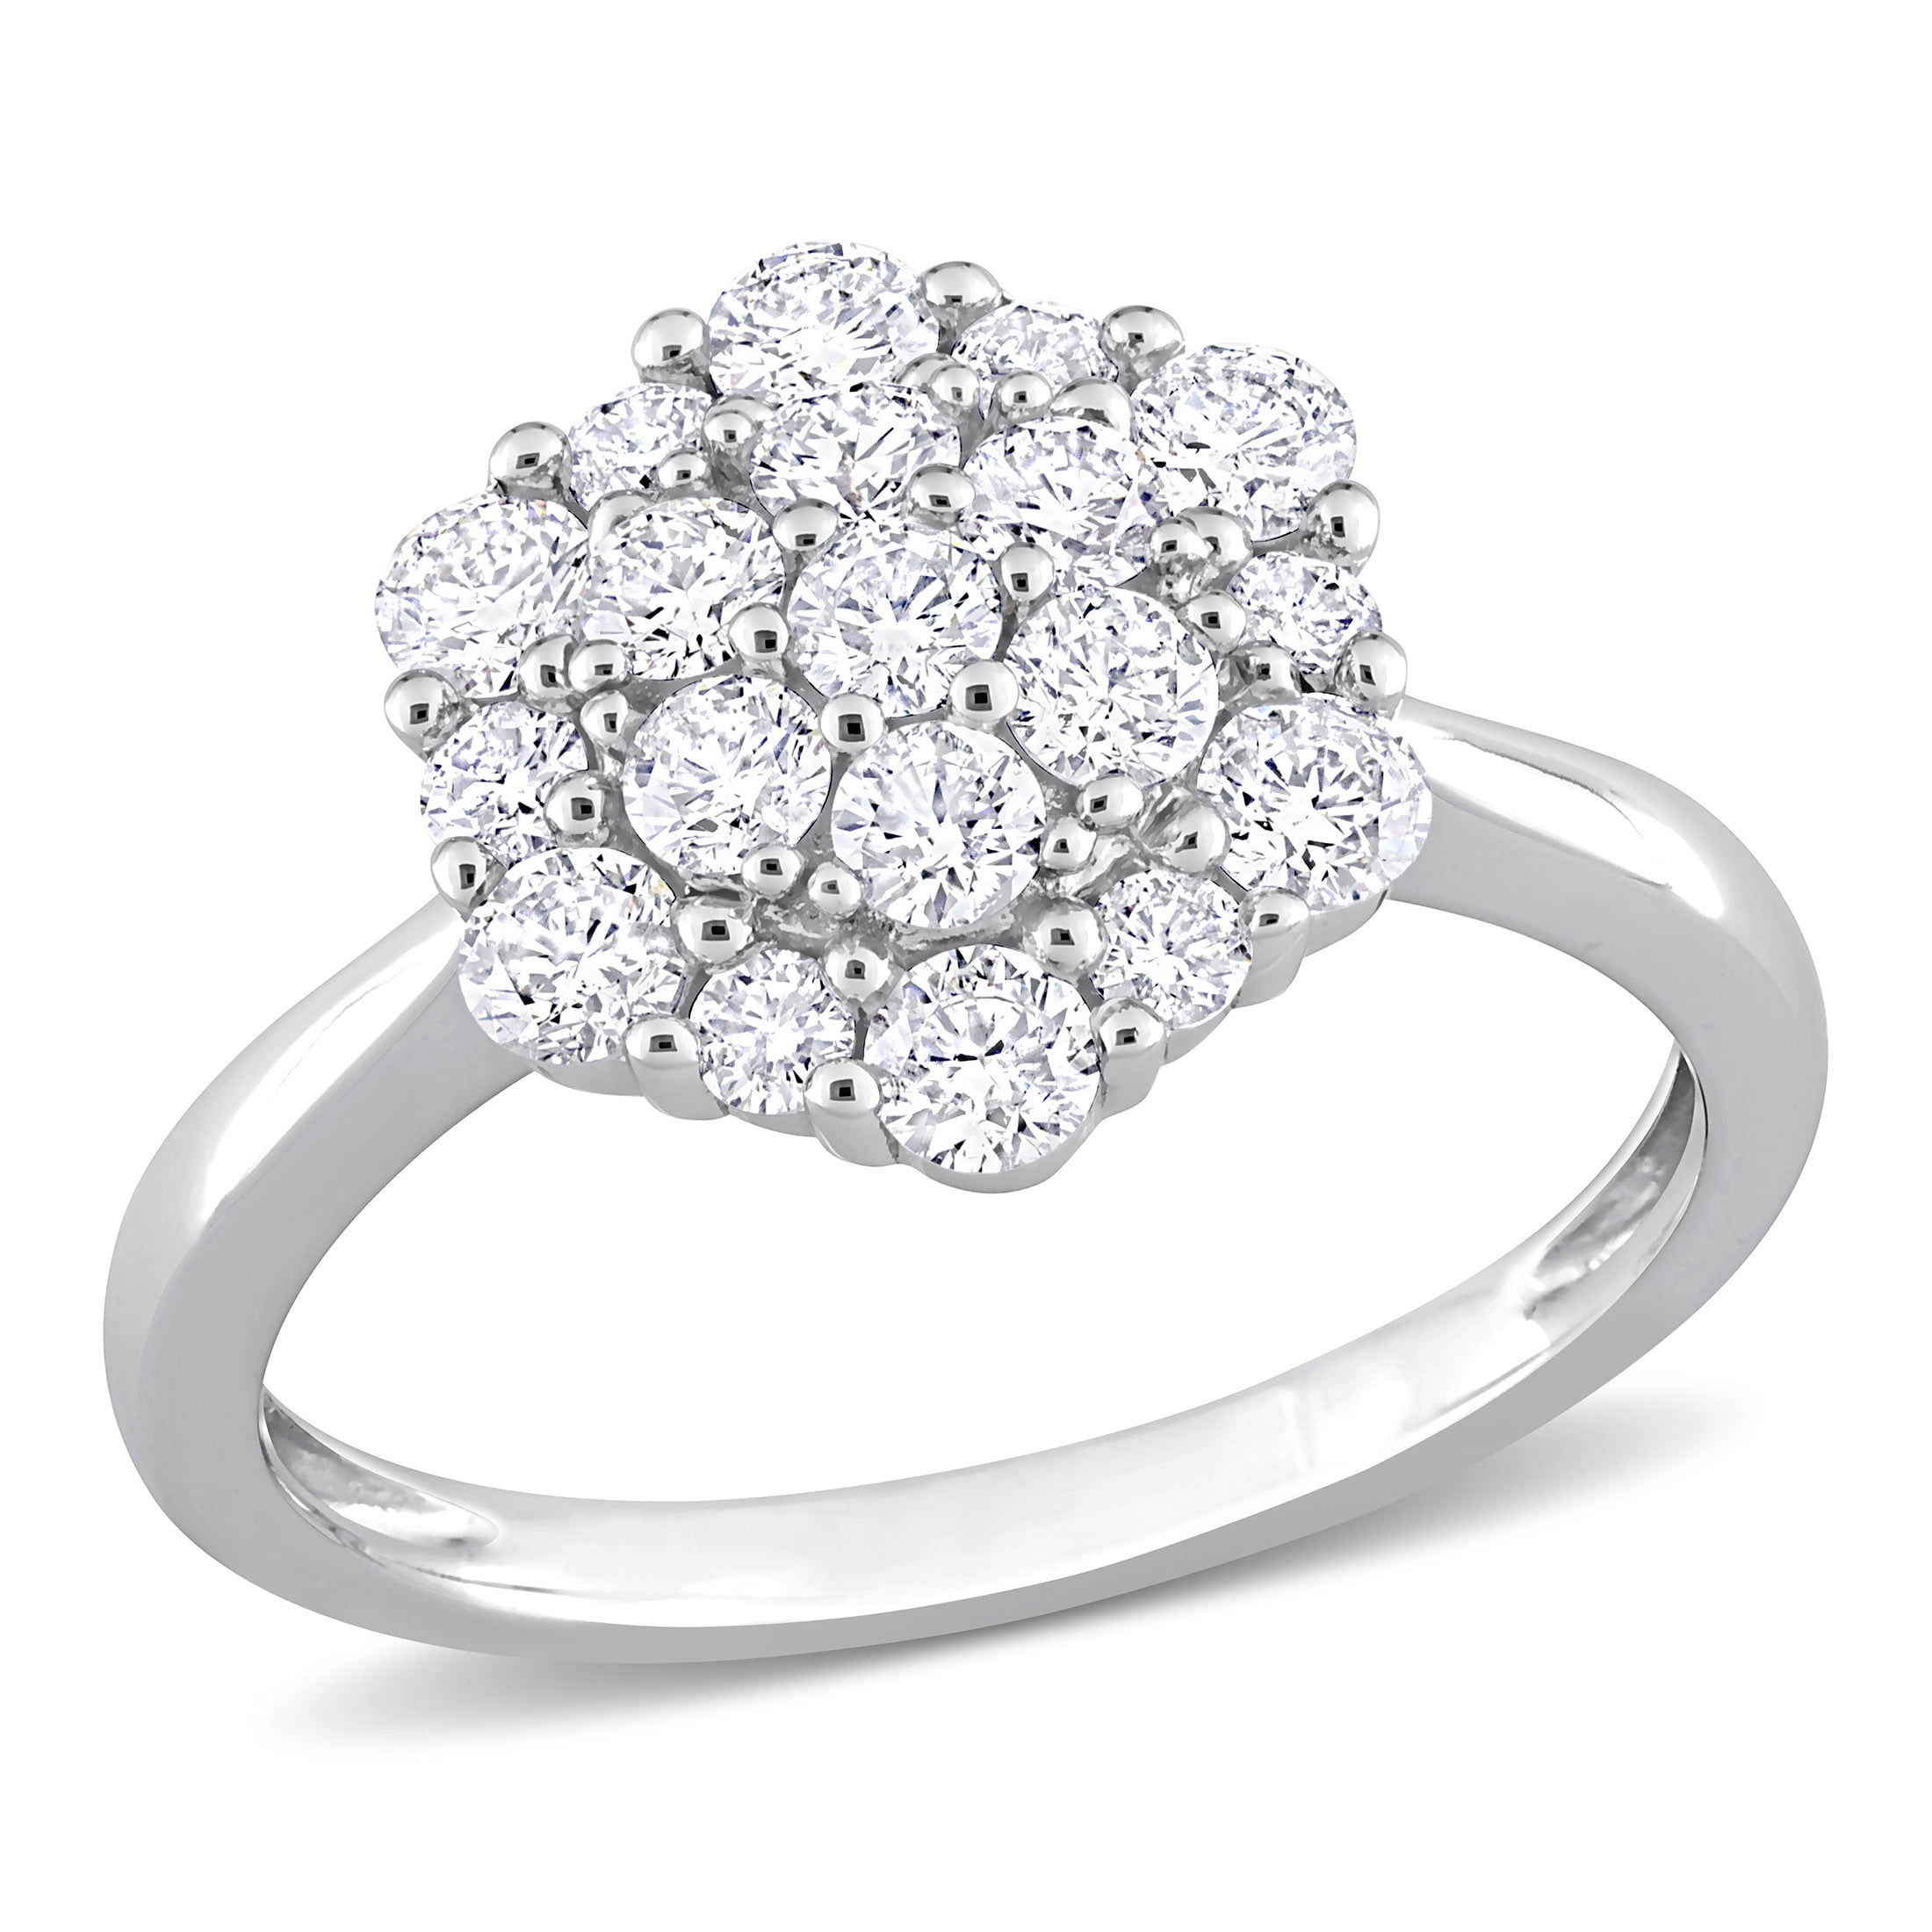 Floral Cluster Diamond Halo Engagement Ring : 41338 : Arden Jewelers